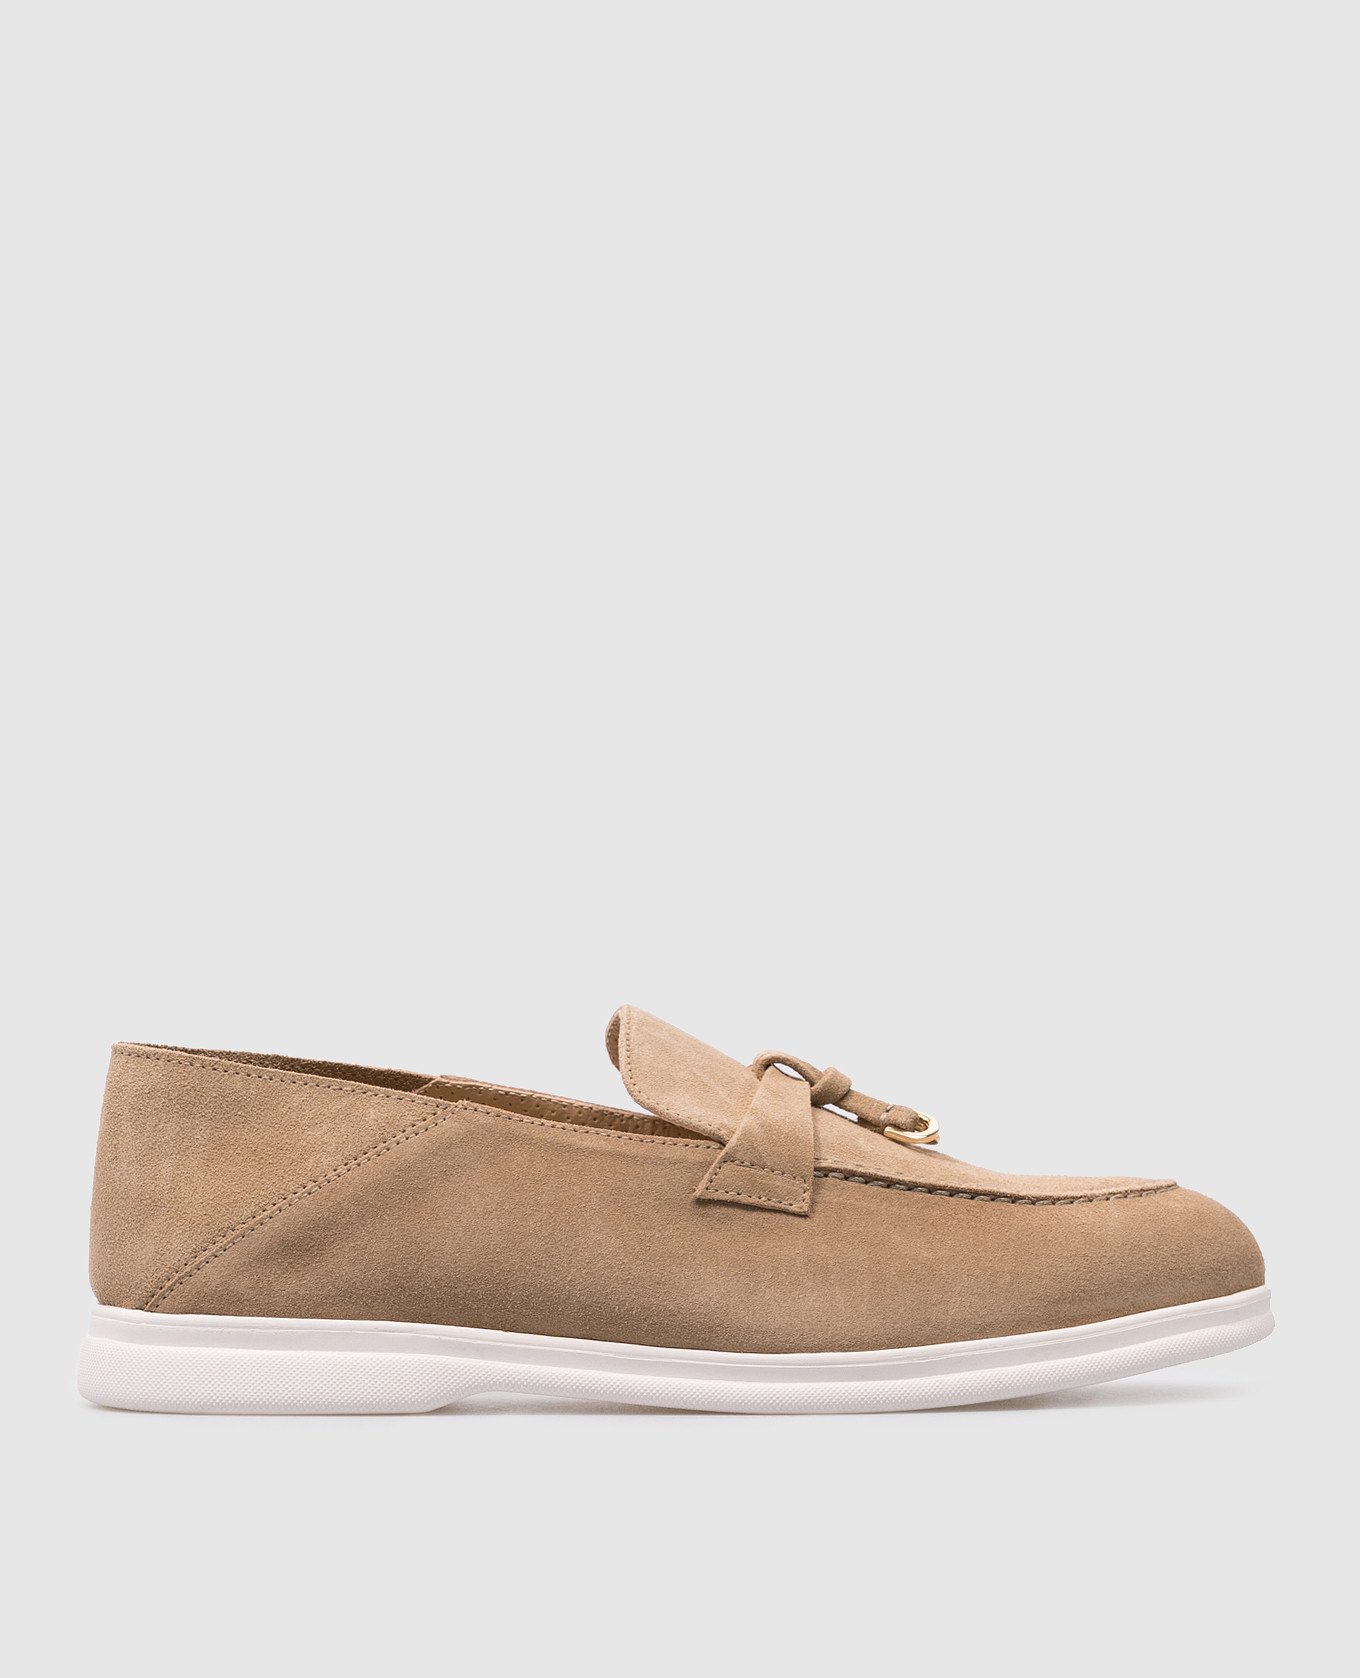 Coco beige suede loafers